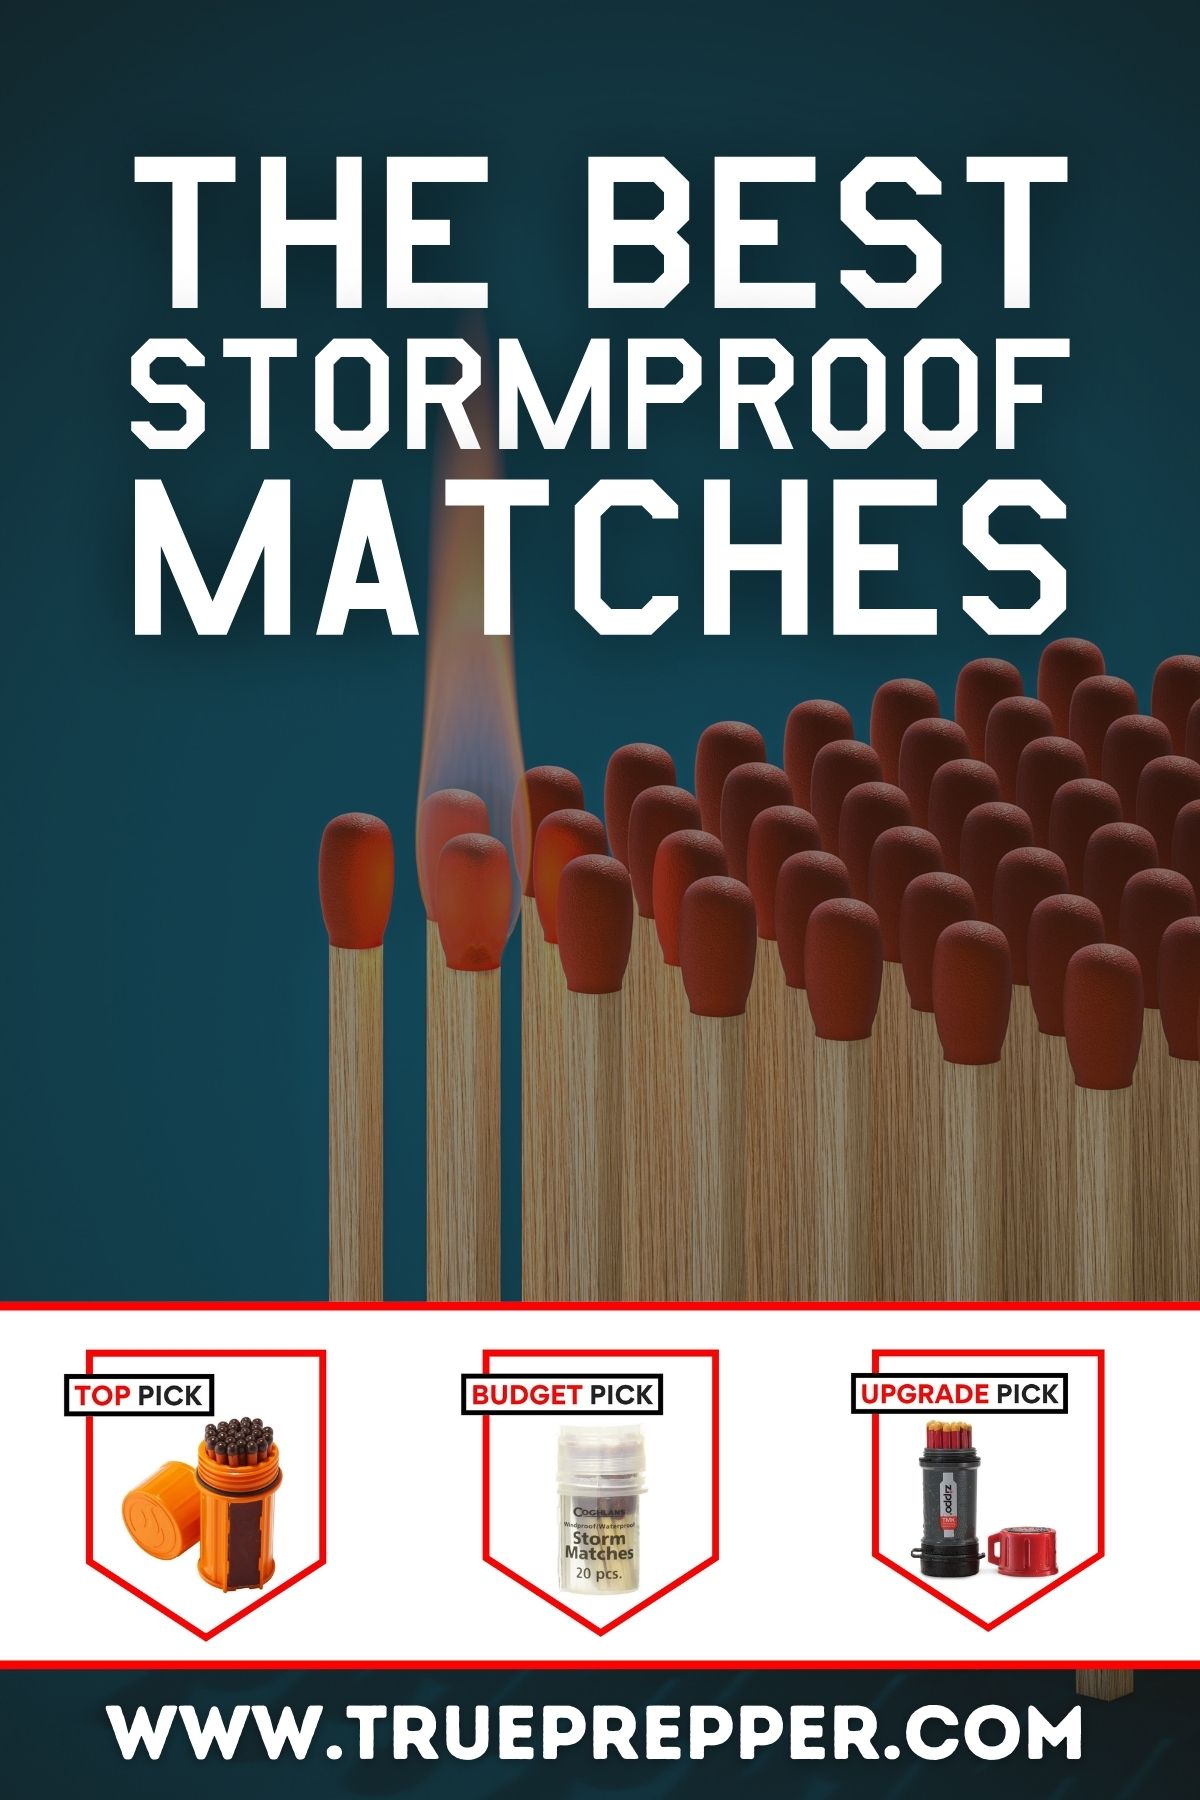 The Best Stormproof Matches for Survival Prepping and Emergencies